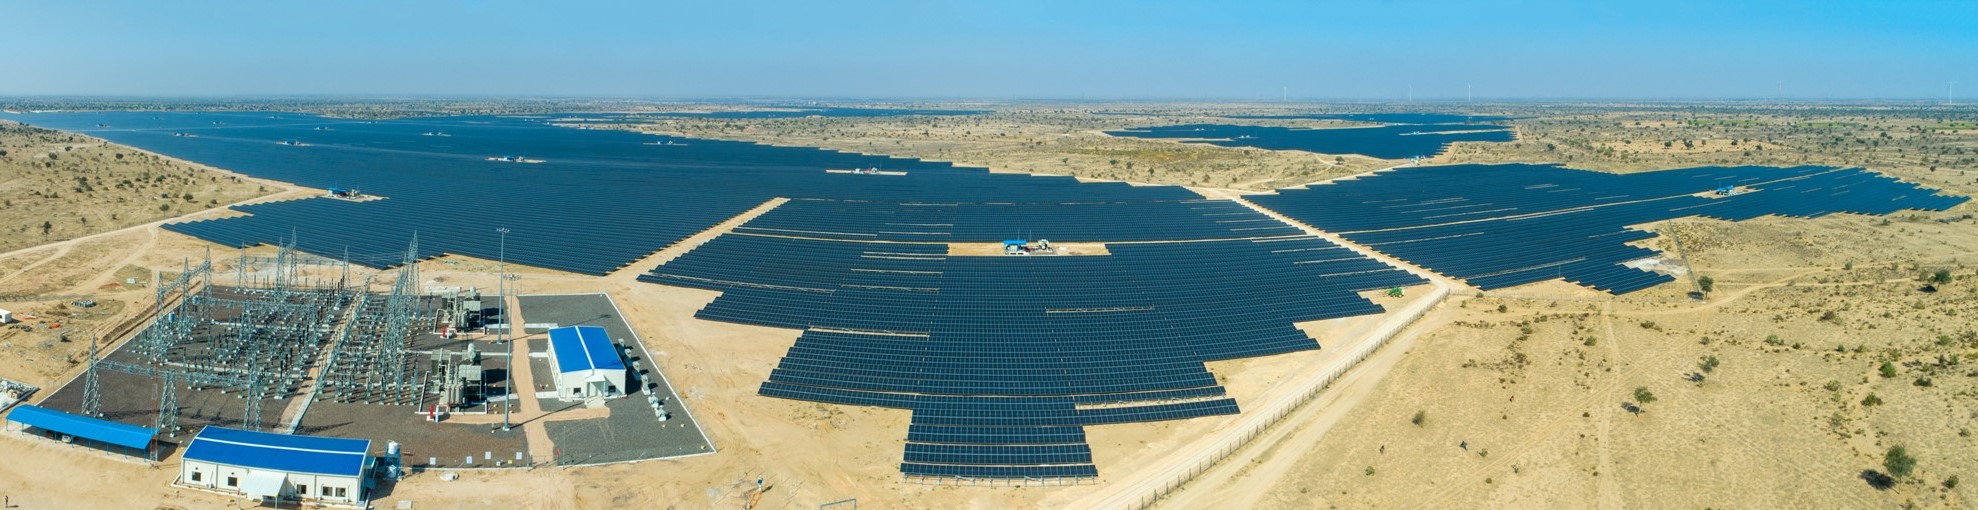 Adani Green switches on India’s first hybrid power plant 